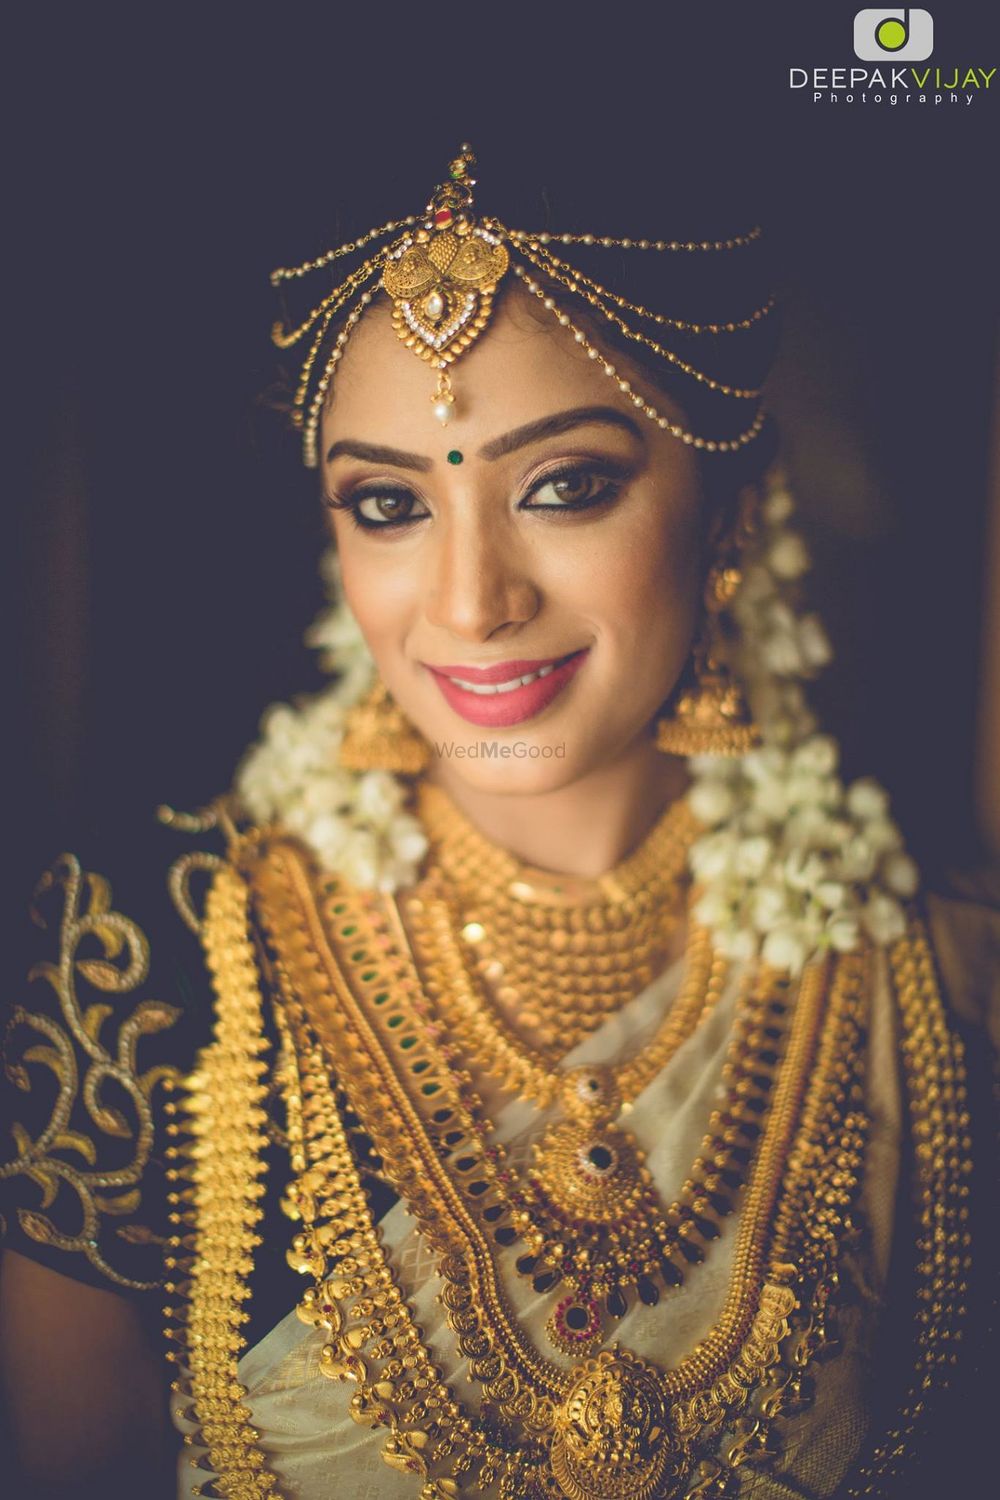 Photo of South Indian bride with layered necklaces in gold